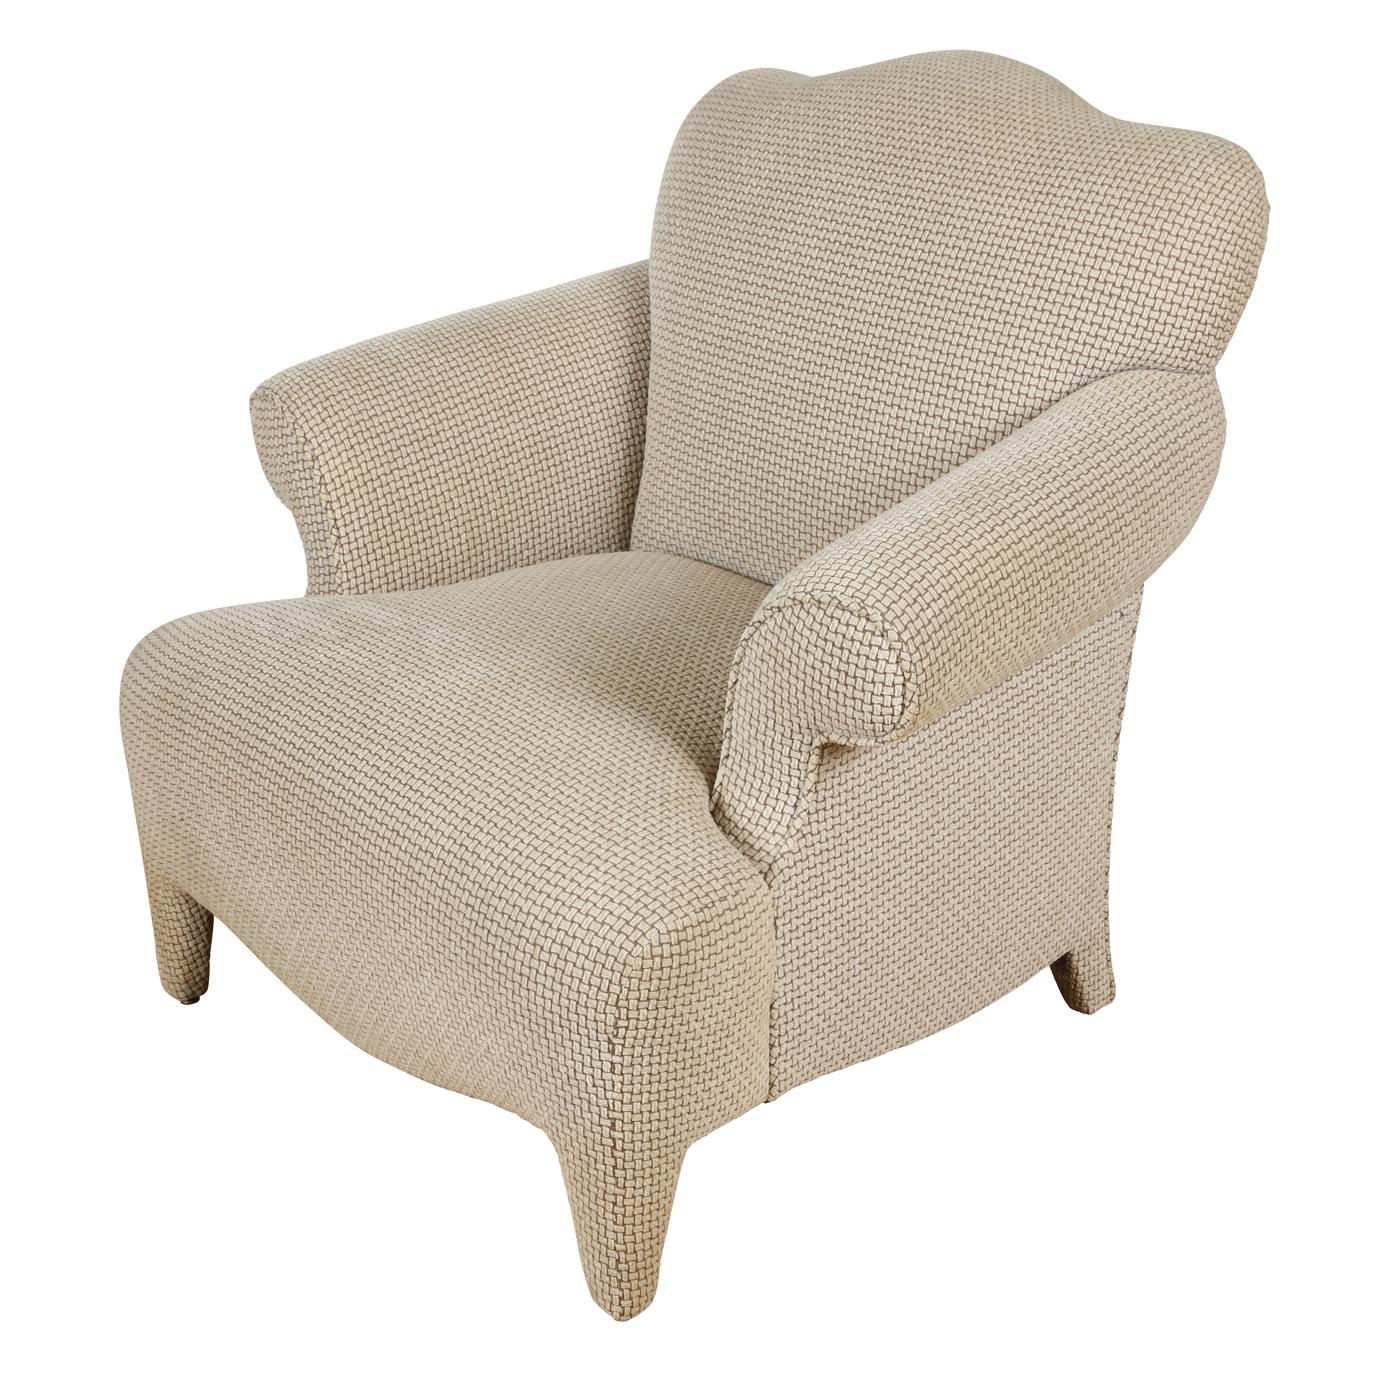 Vintage Donghia style neutral fully upholstered club chair.